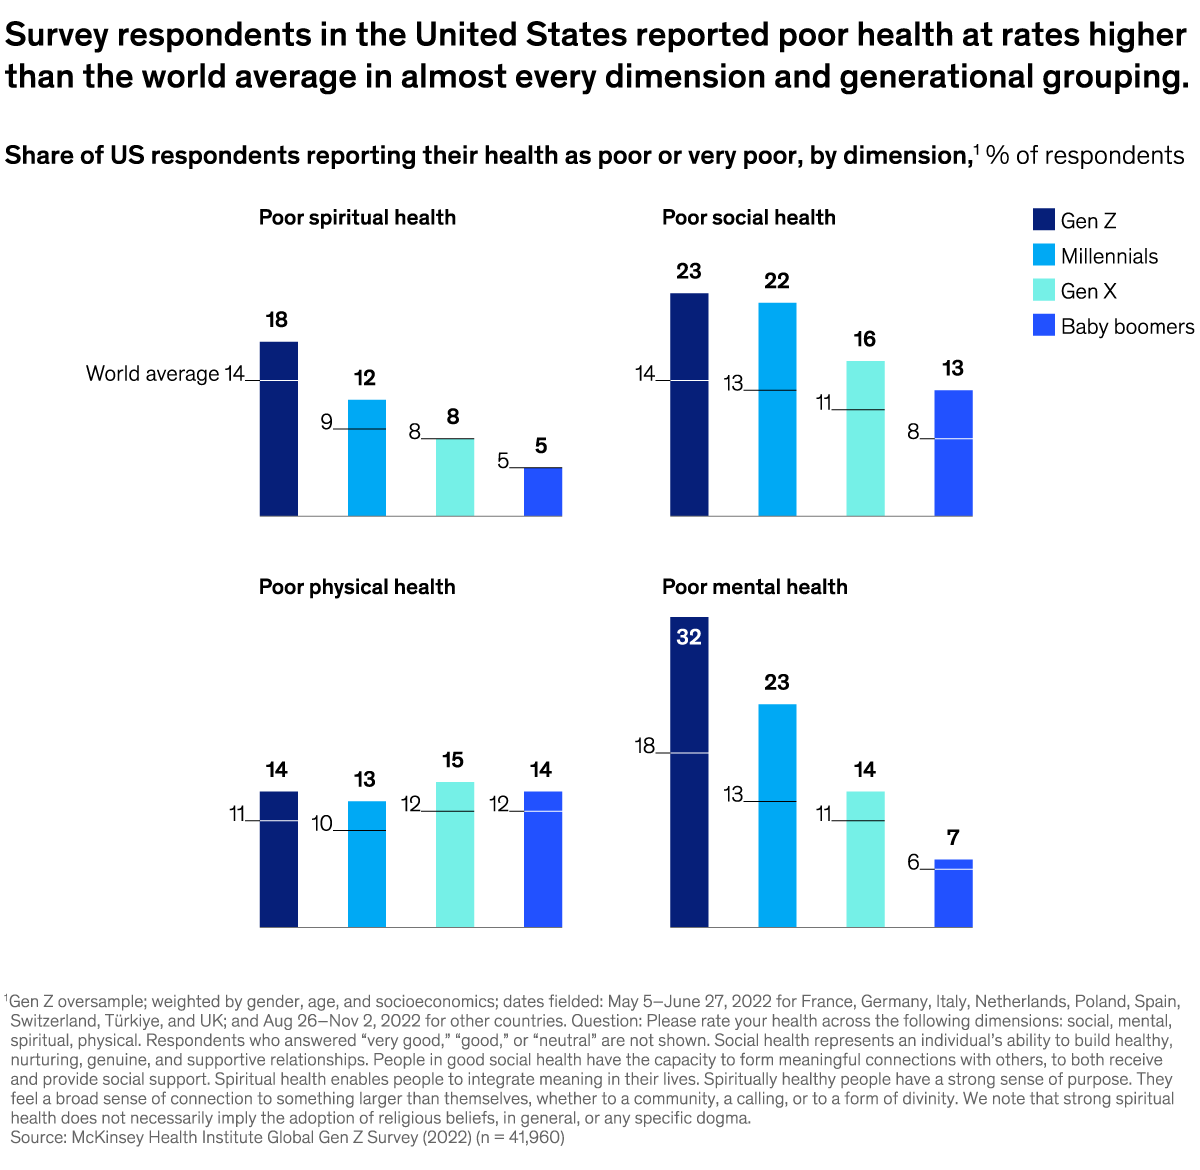 A chart titled “Survey respondents in the United States reported poor health at rates higher than the world average in almost every dimension and generational grouping.” Click to open the full article on McKinsey.com.